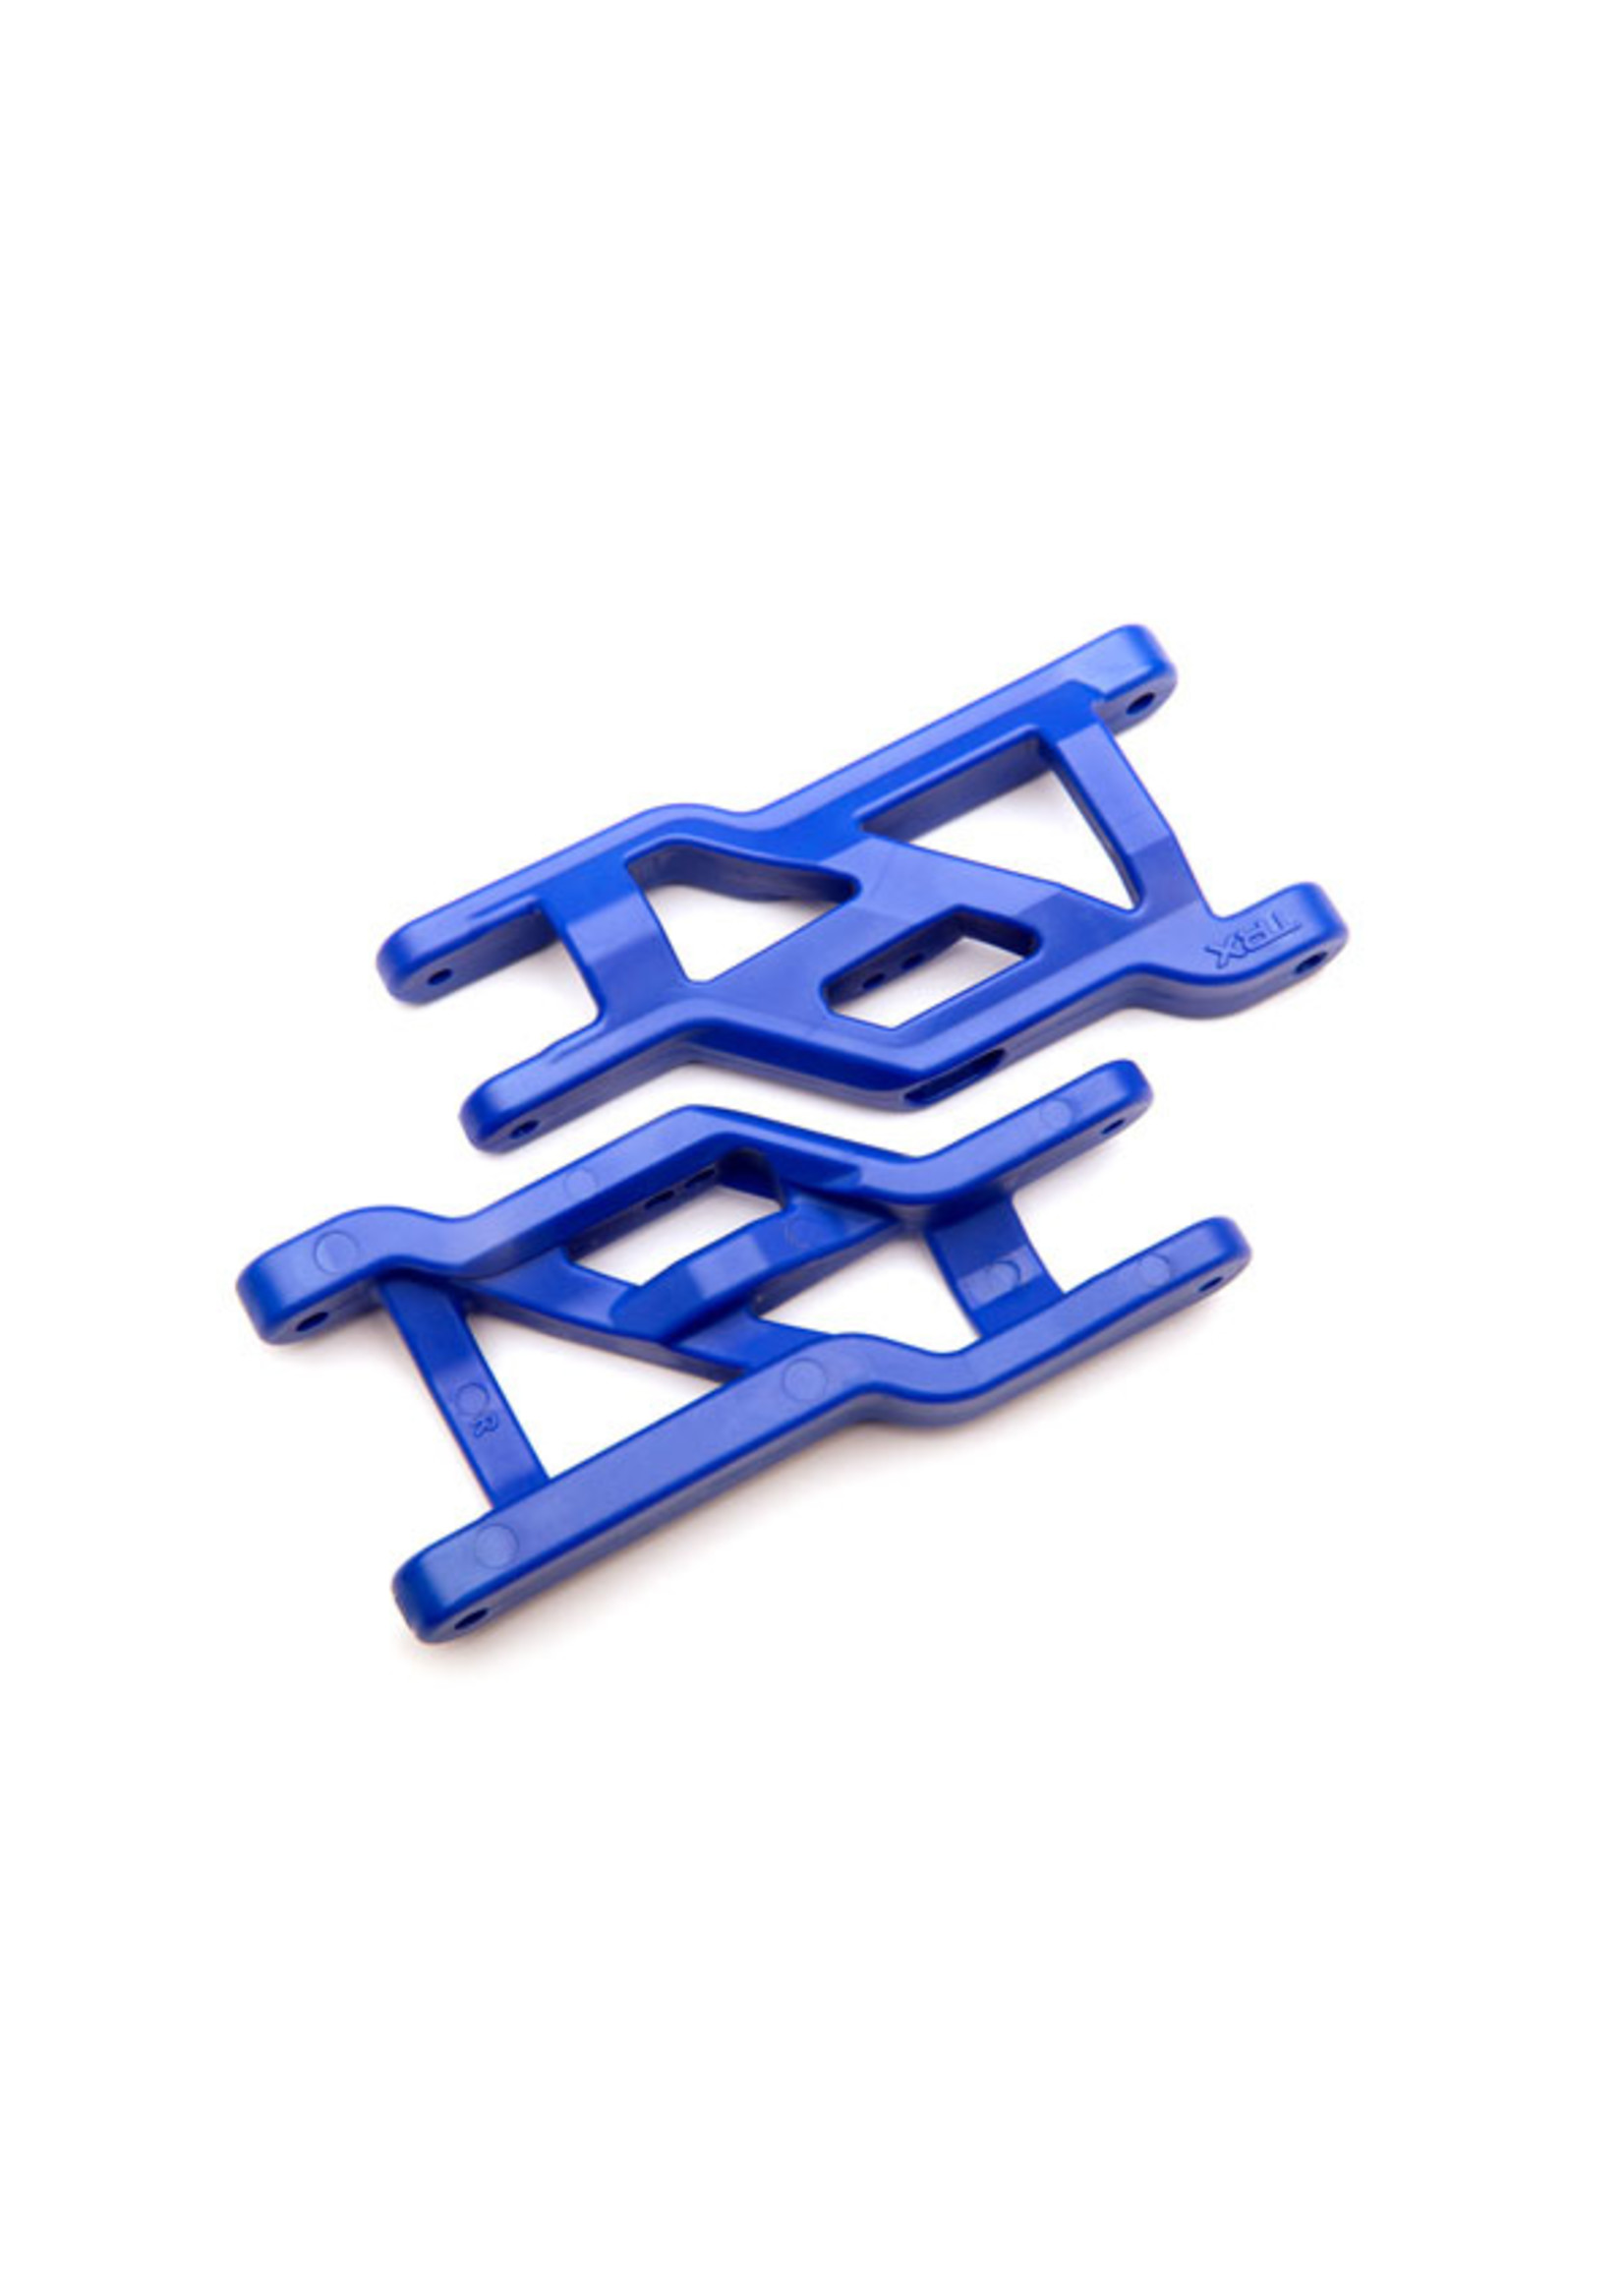 Traxxas 3631A - Heavy Duty Front Suspension Arms - Blue